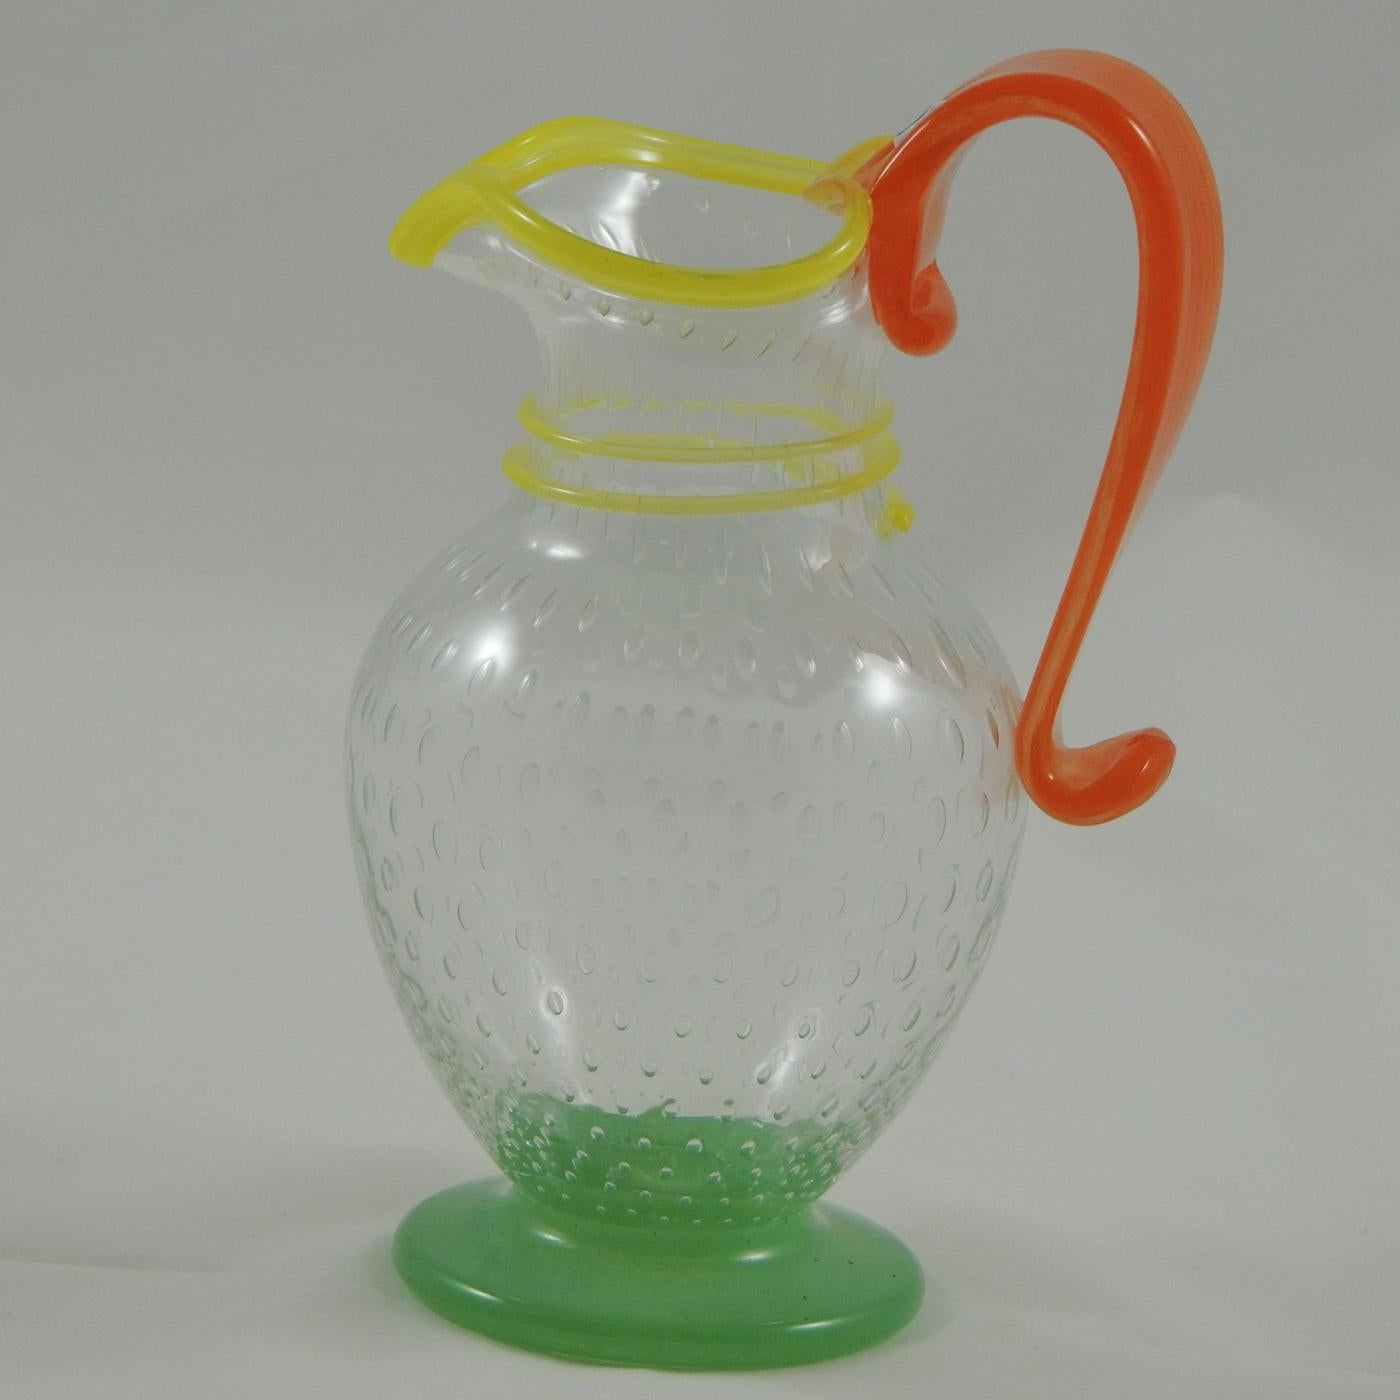 The traditional design of this striking caraffe is made modern by the use of vivid colors. This piece is in mouth-blown Murano glass with a handle embellished by a murrina, typical of the Murano glass art, while the transparent body of the caraffe